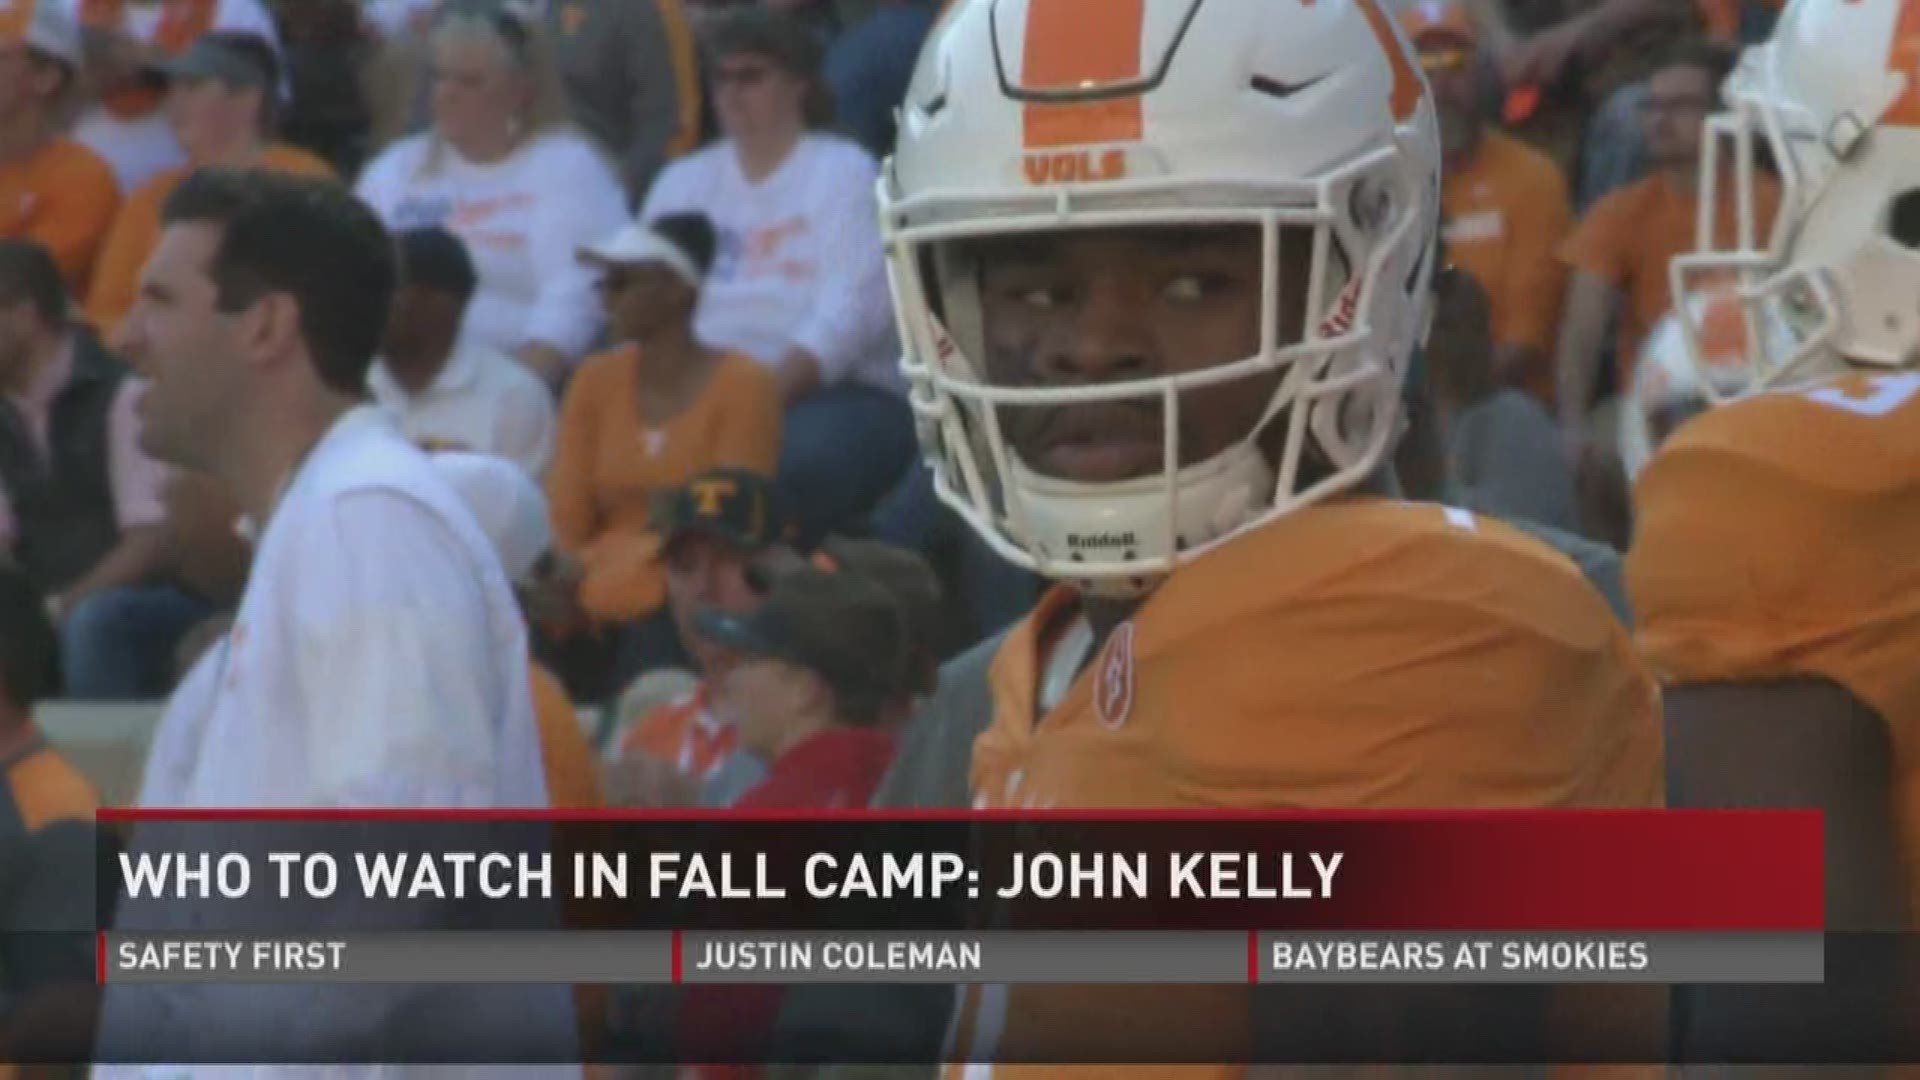 Luke and Louis explain why John Kelly and Todd Kelly Jr. (no relation) are two guys to watch with laser focus in fall camp.